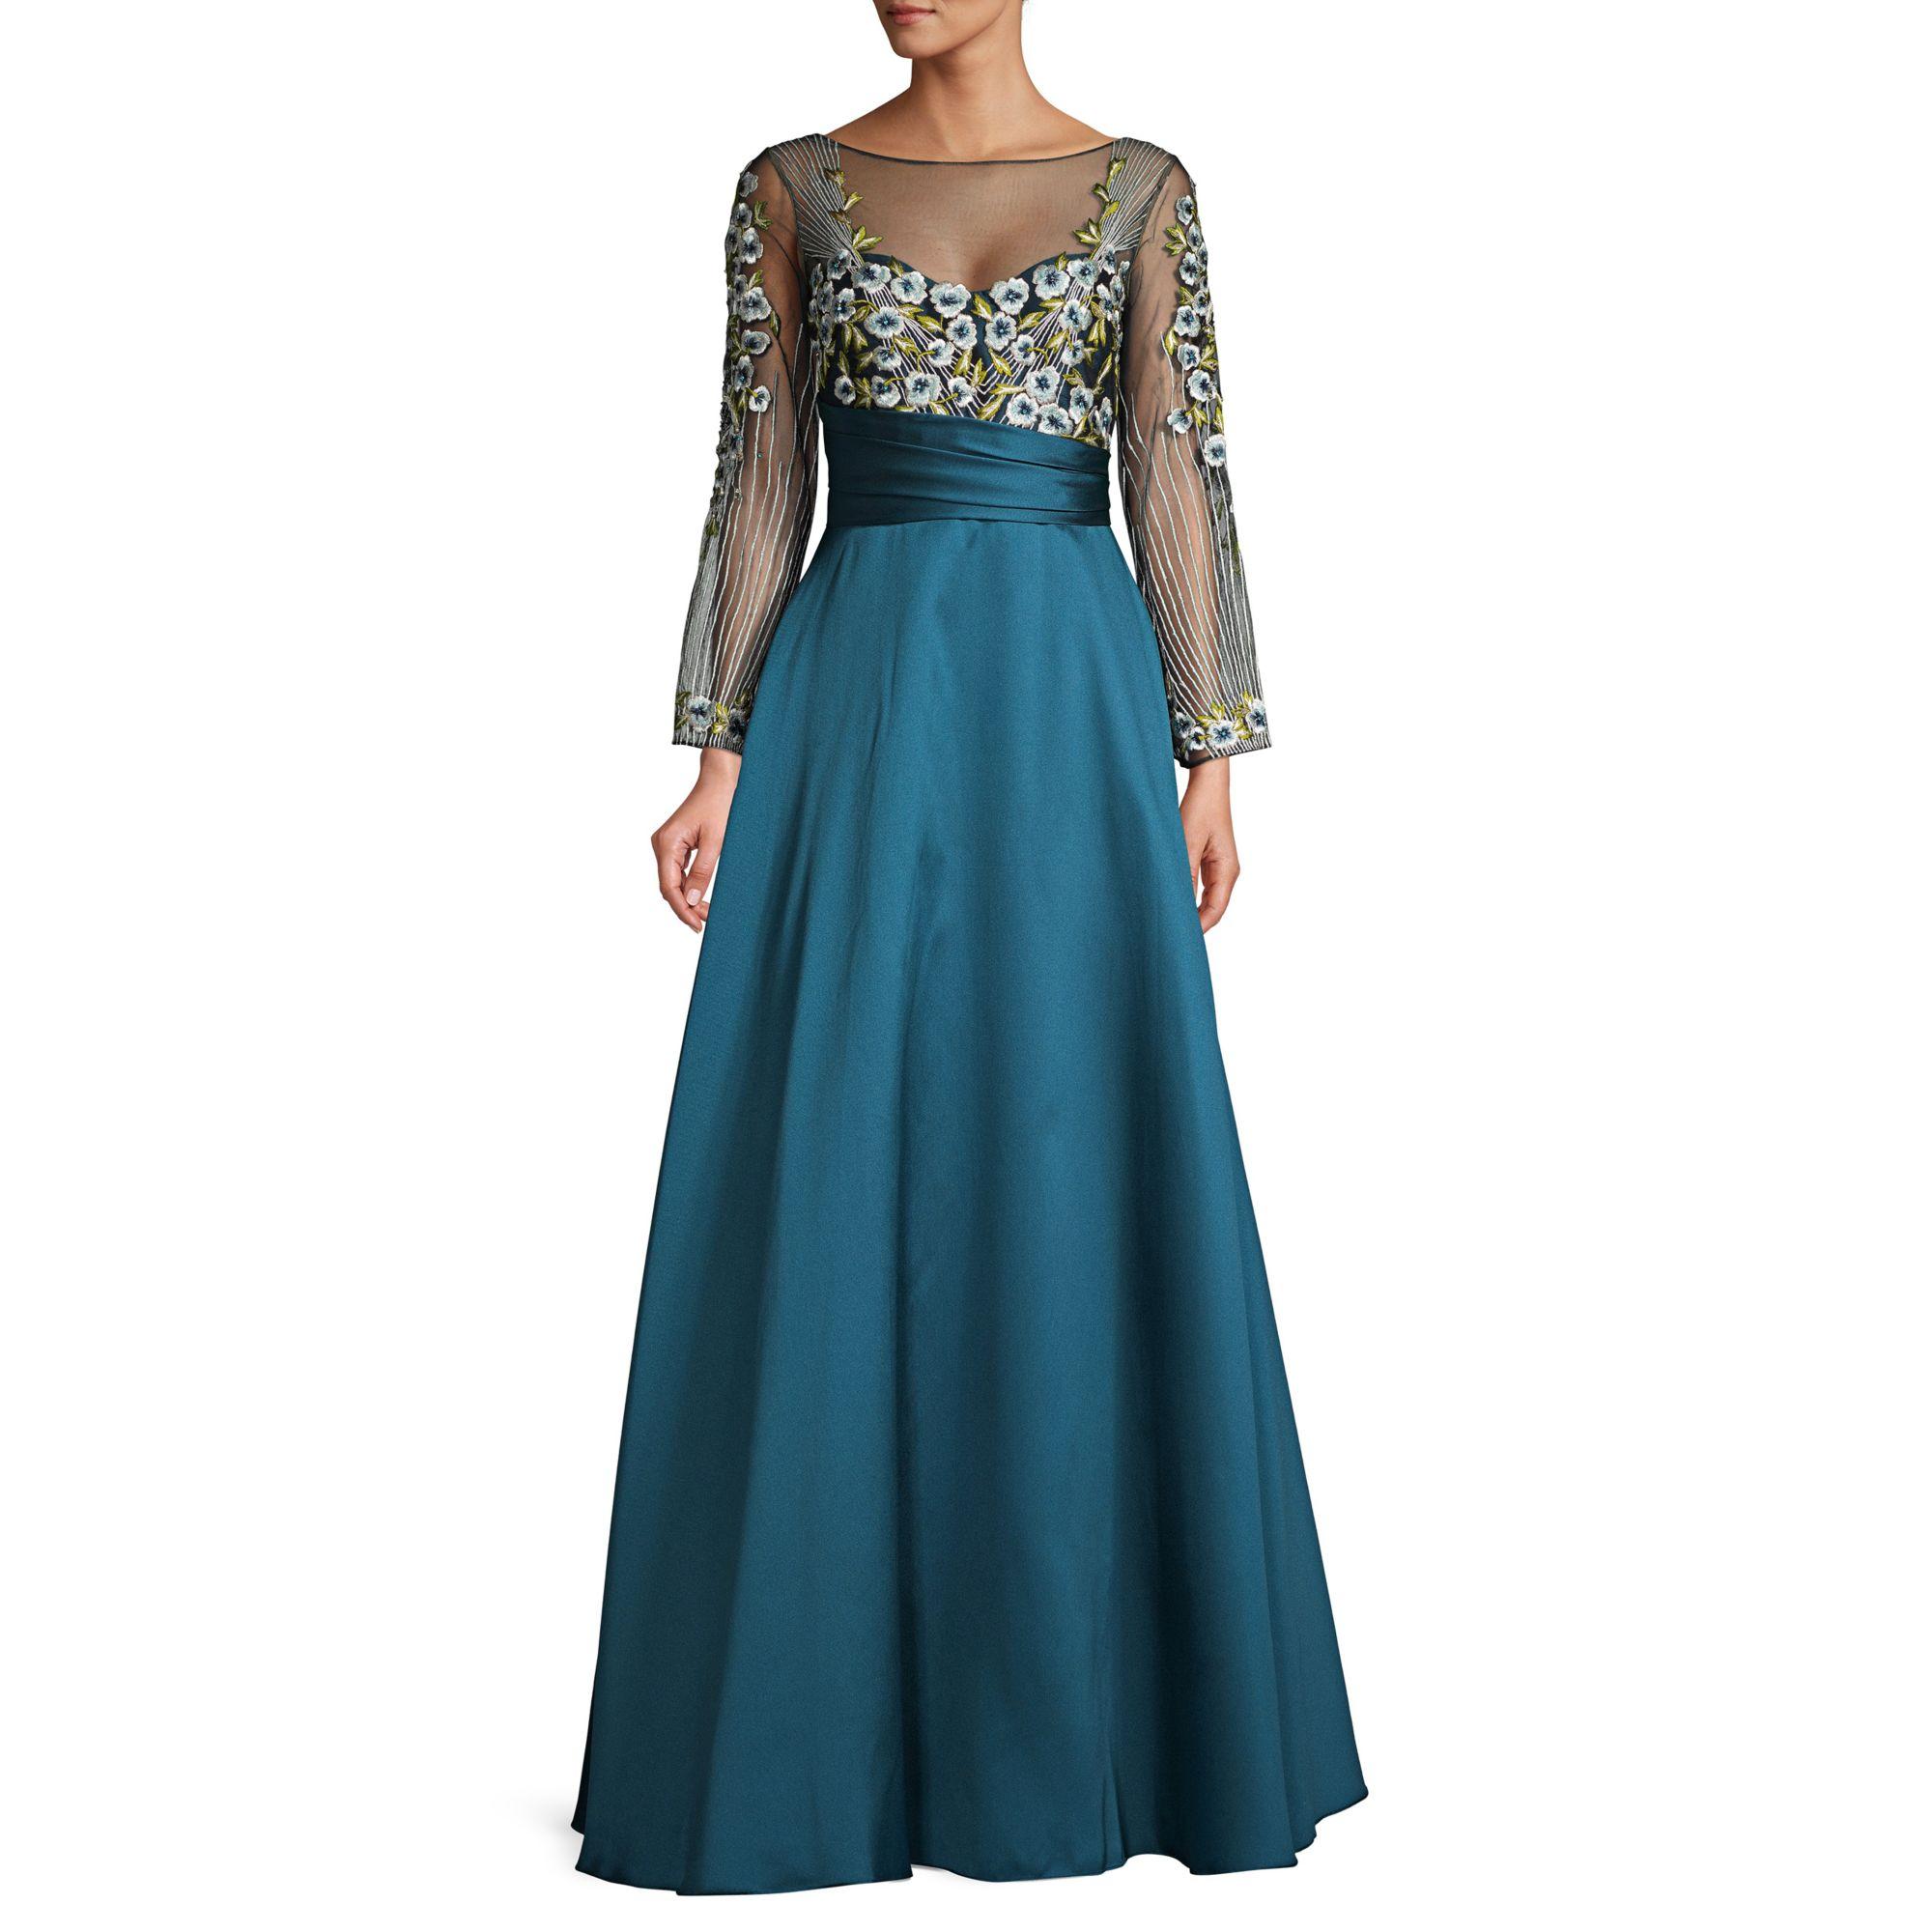 Marchesa notte Synthetic Embroidered Floral Ball Gown in Teal (Blue) - Lyst